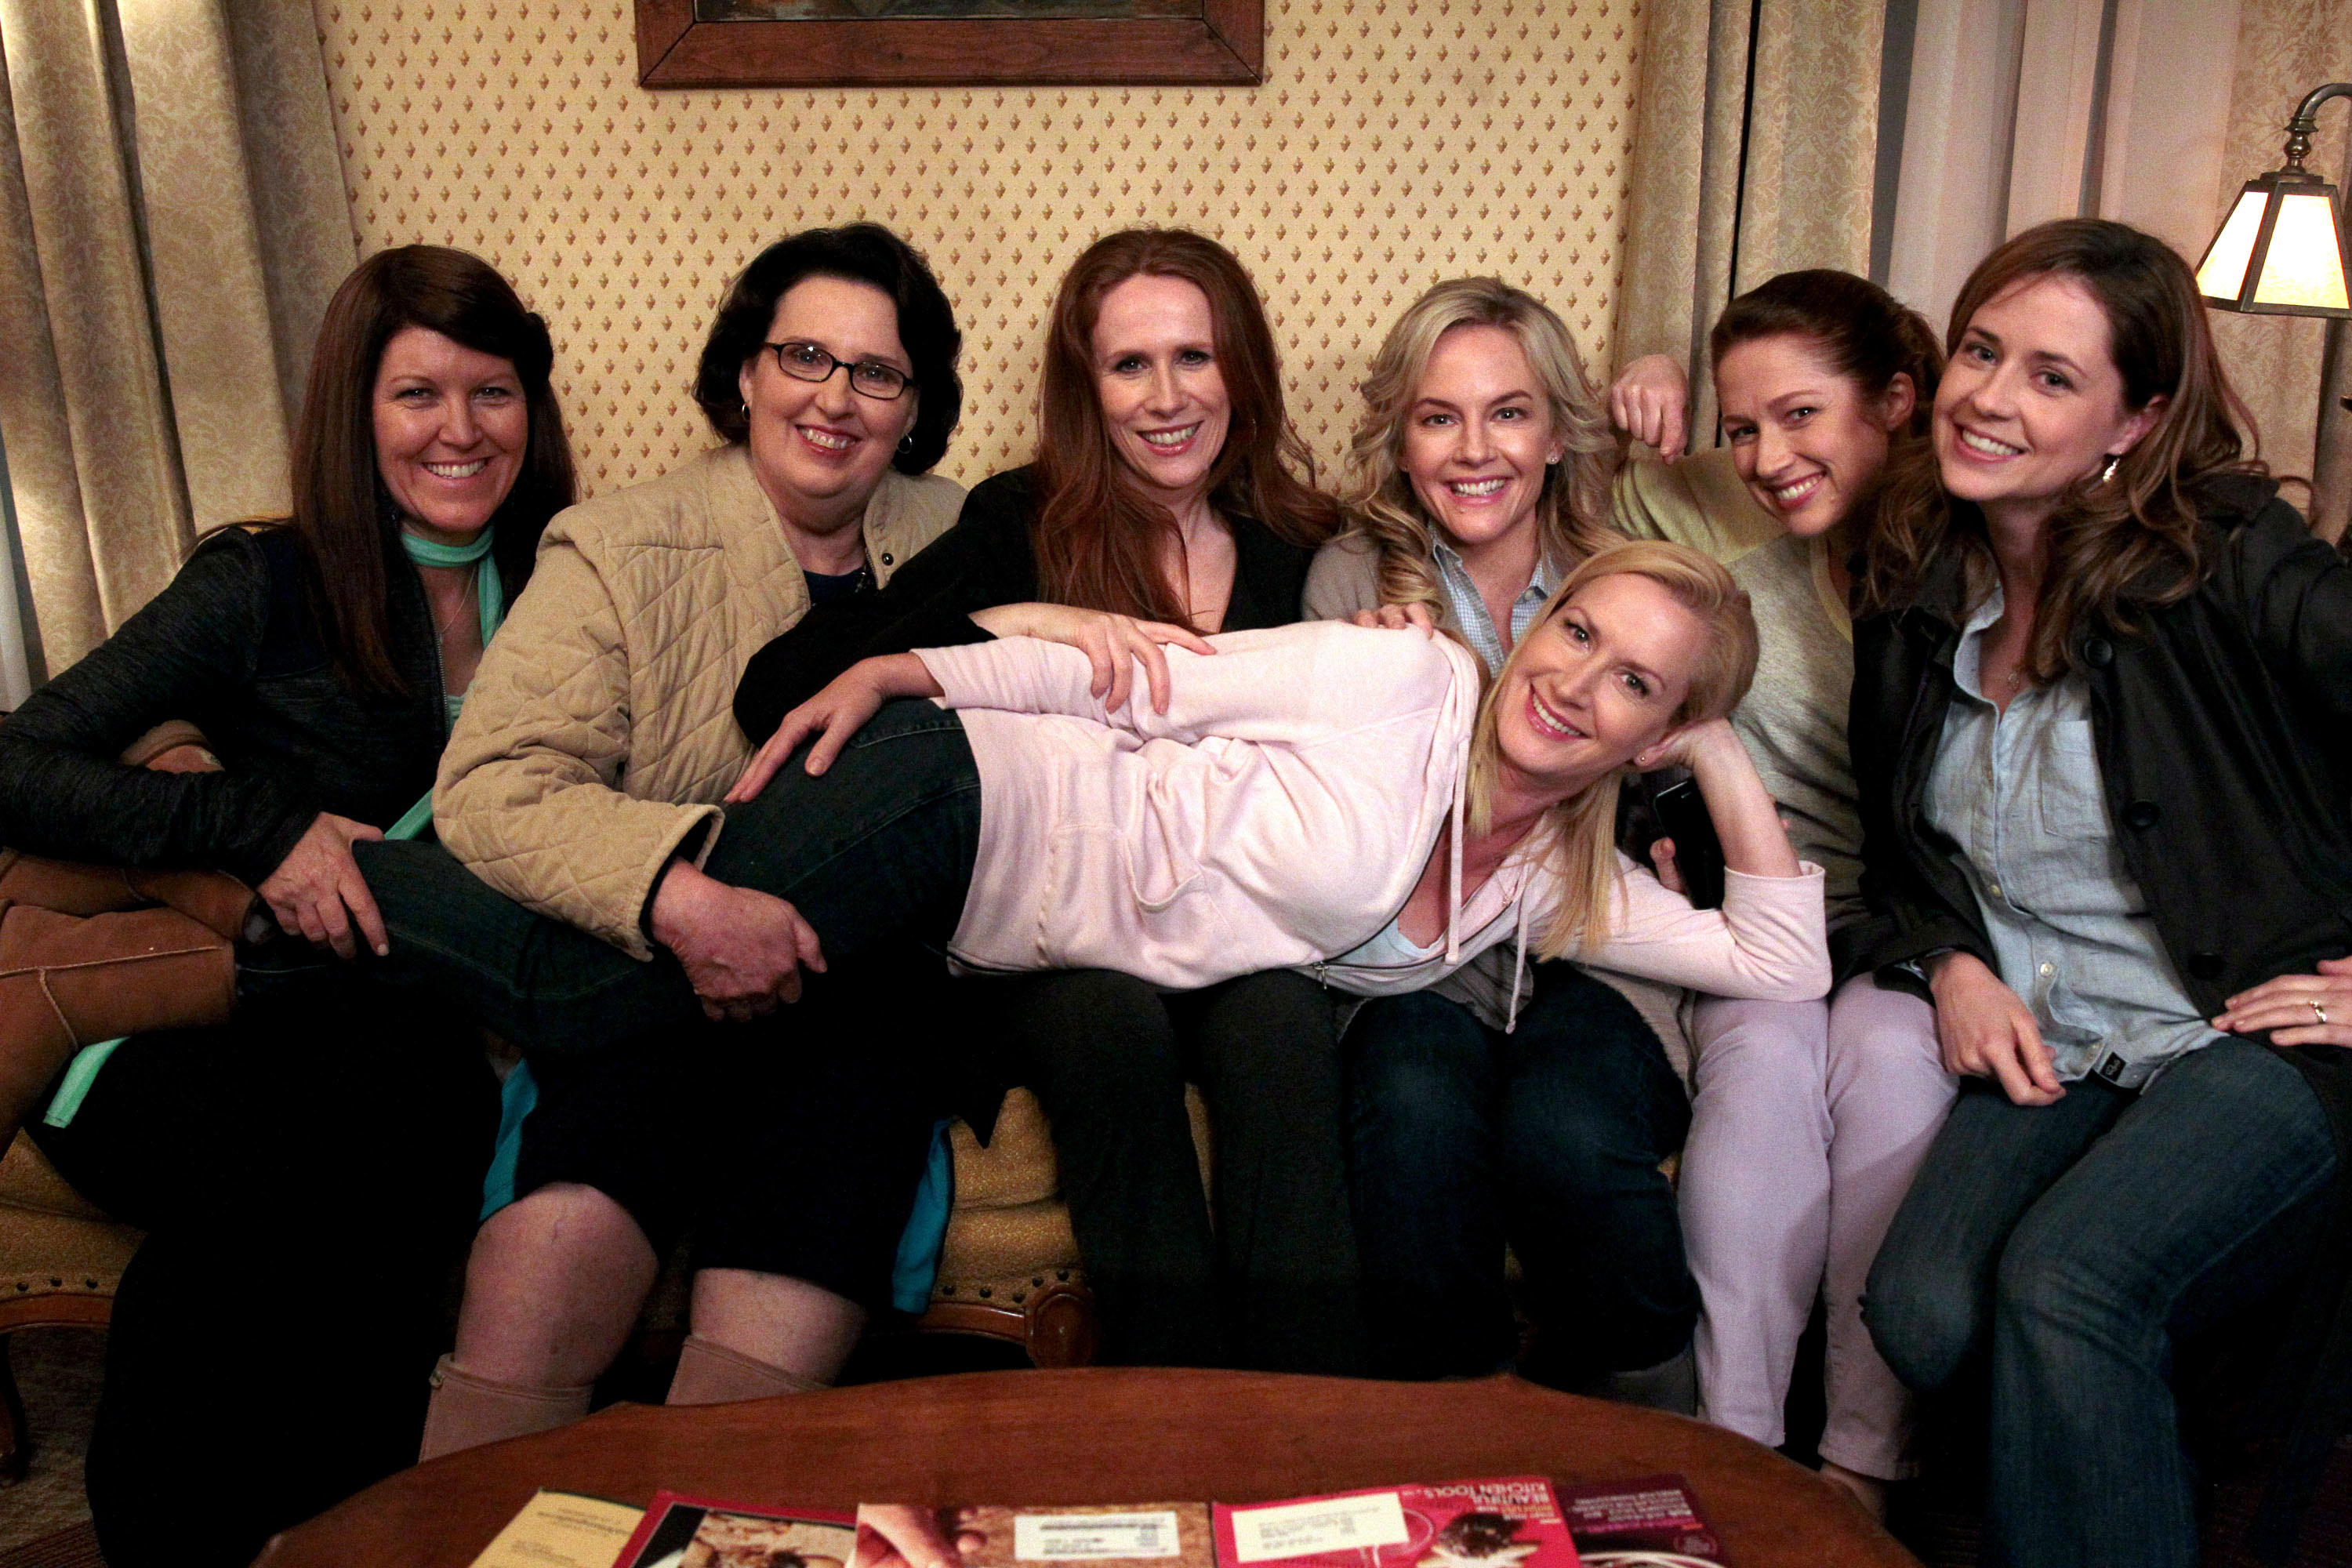 the women of the cast posing on a couch